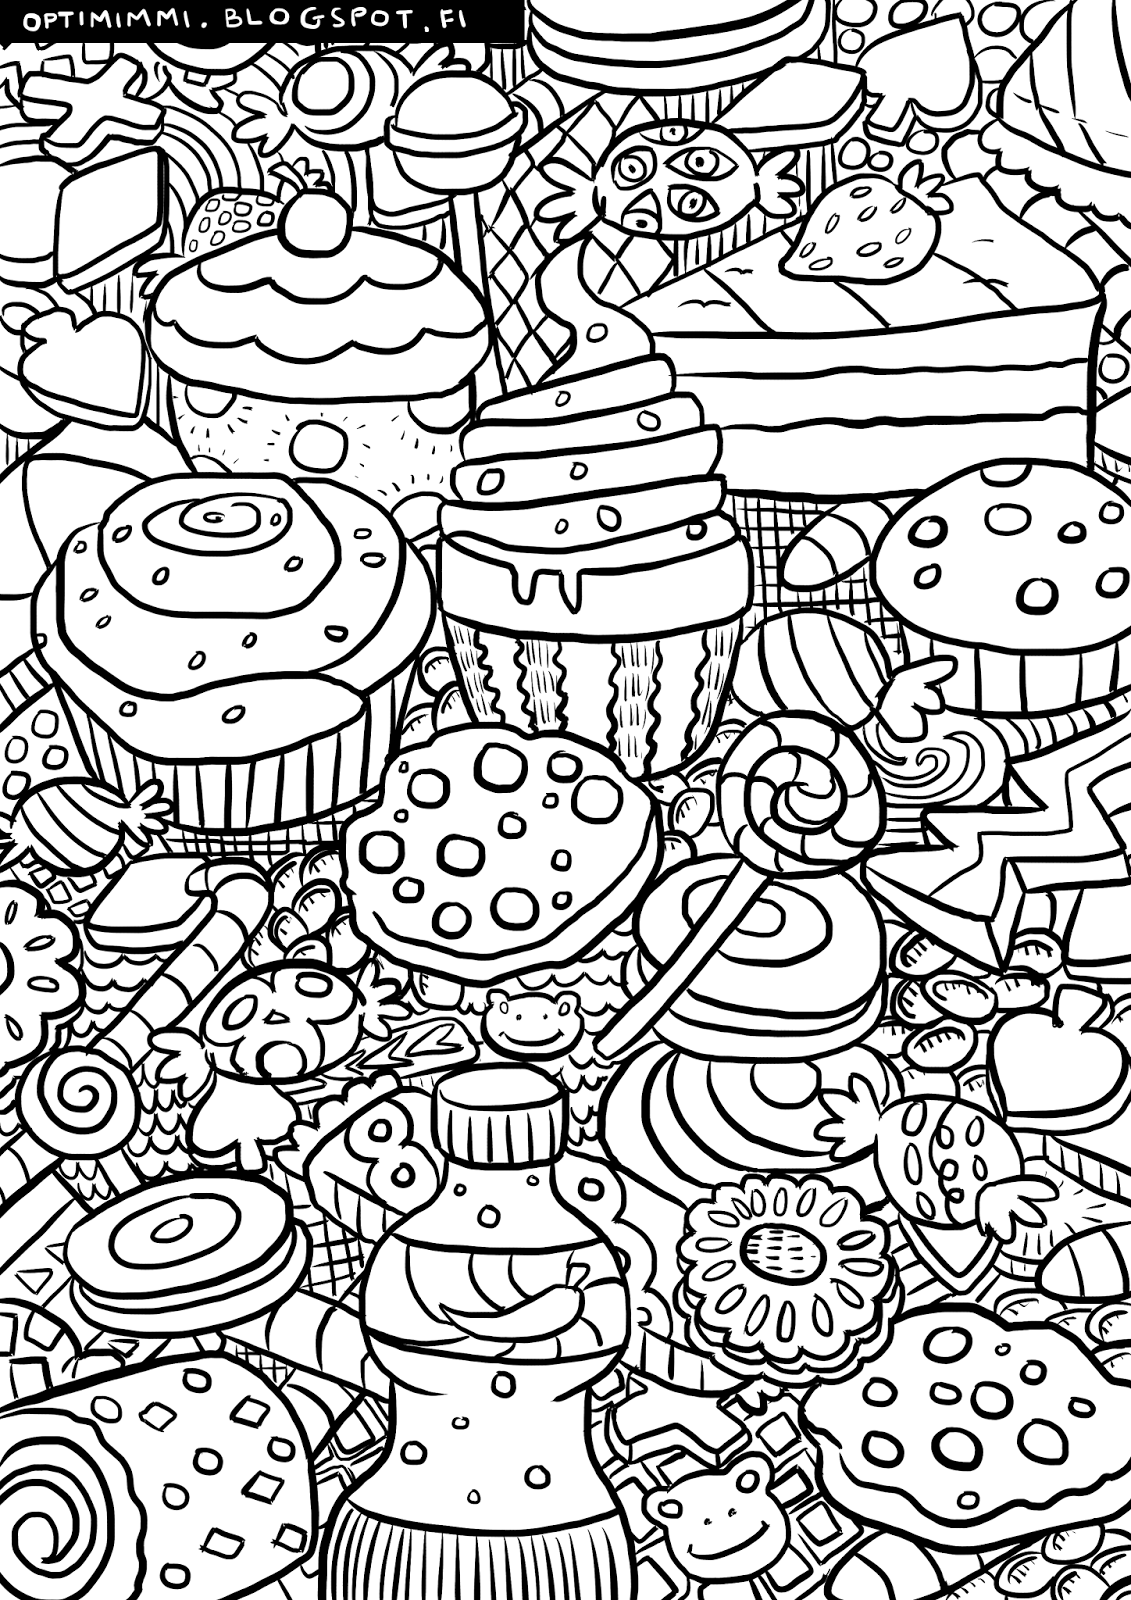 2016: Coloring pages / 2016: Värityskuvat